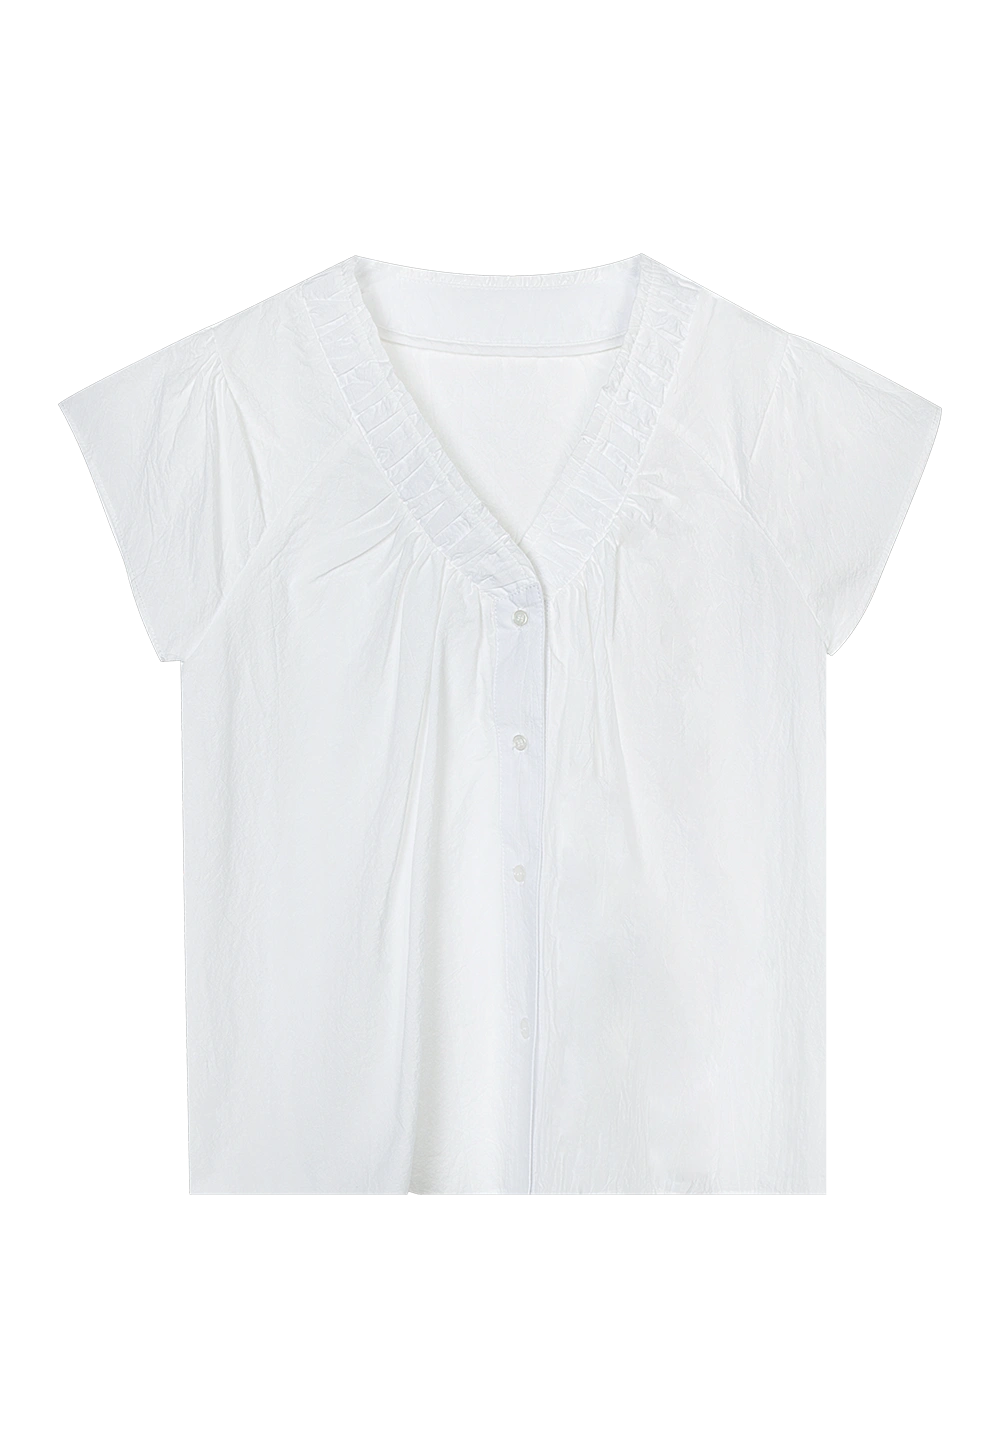 Delicate Gathered Yoke Blouse with Classic Short Sleeves